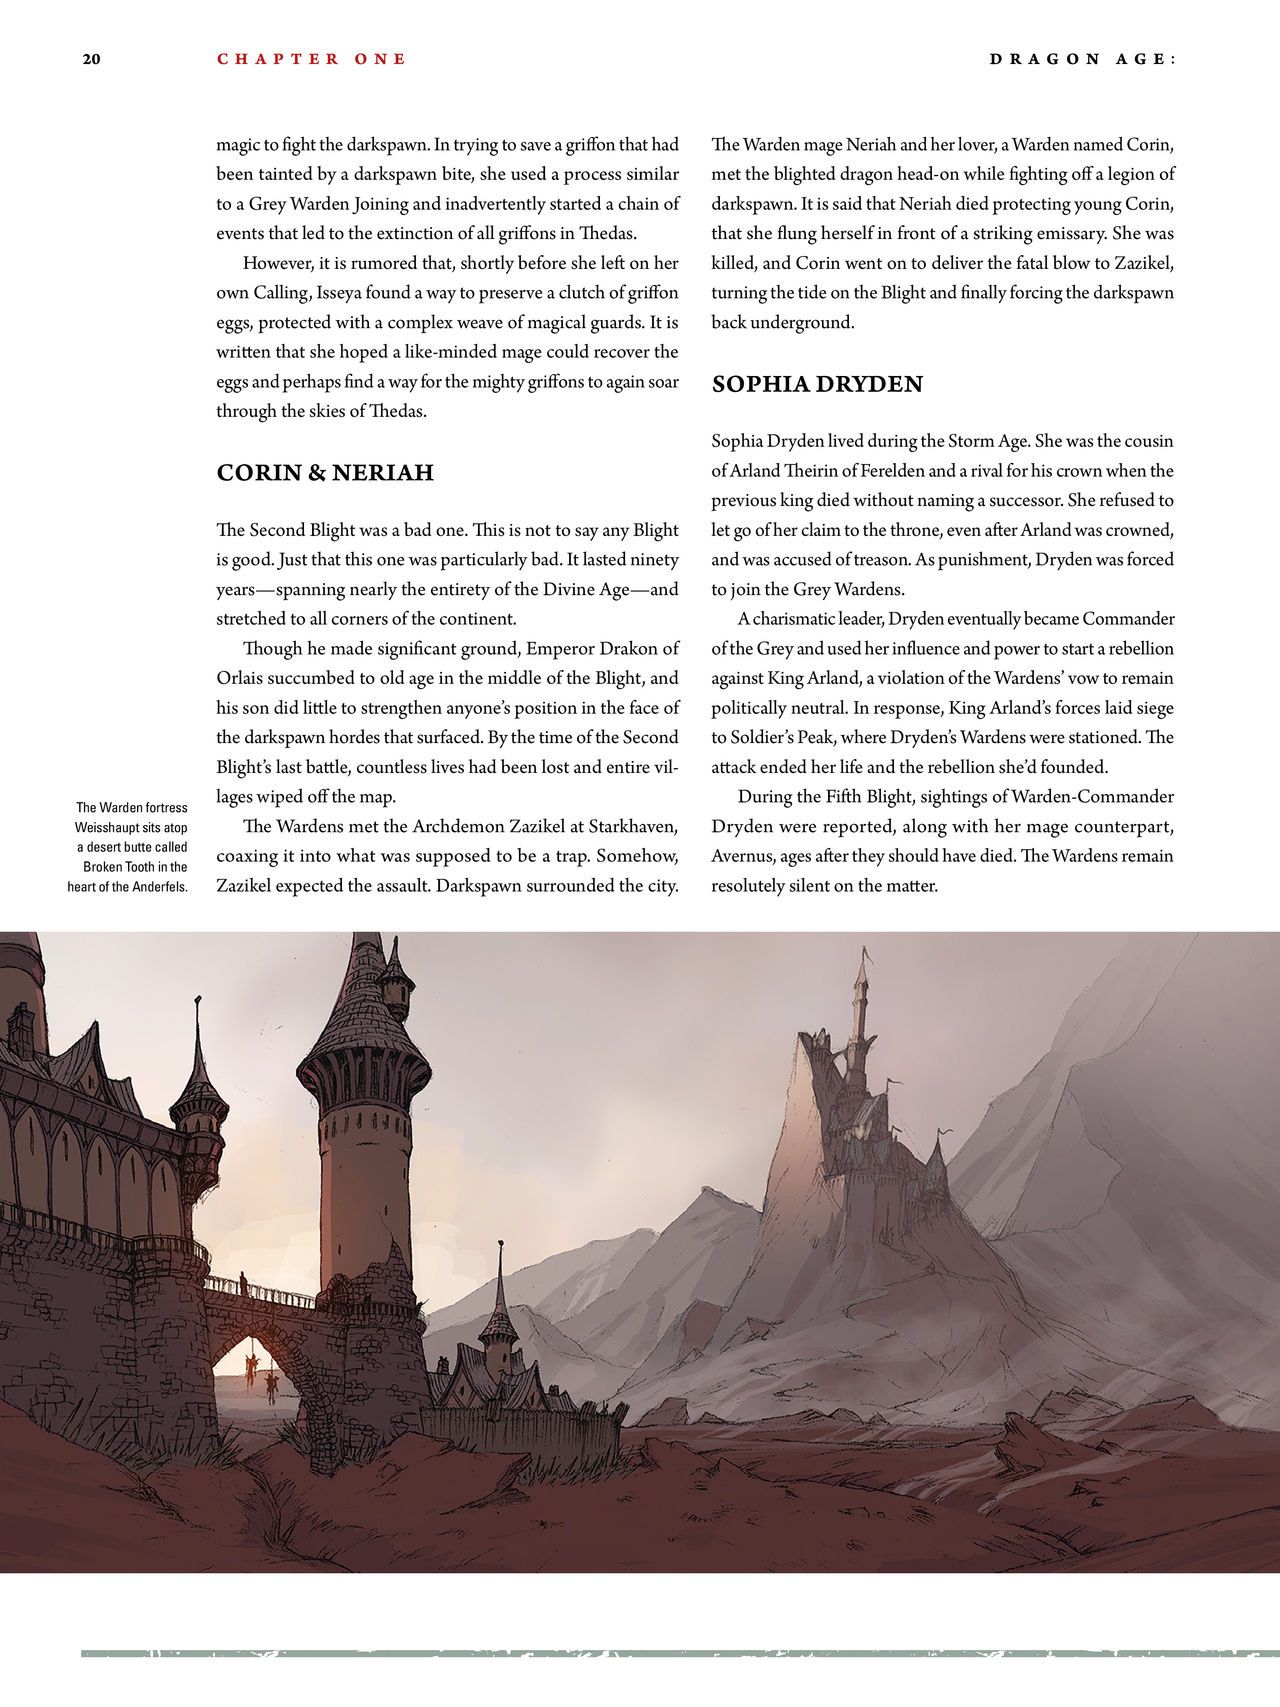 Dragon Age - The World of Thedas v02 18